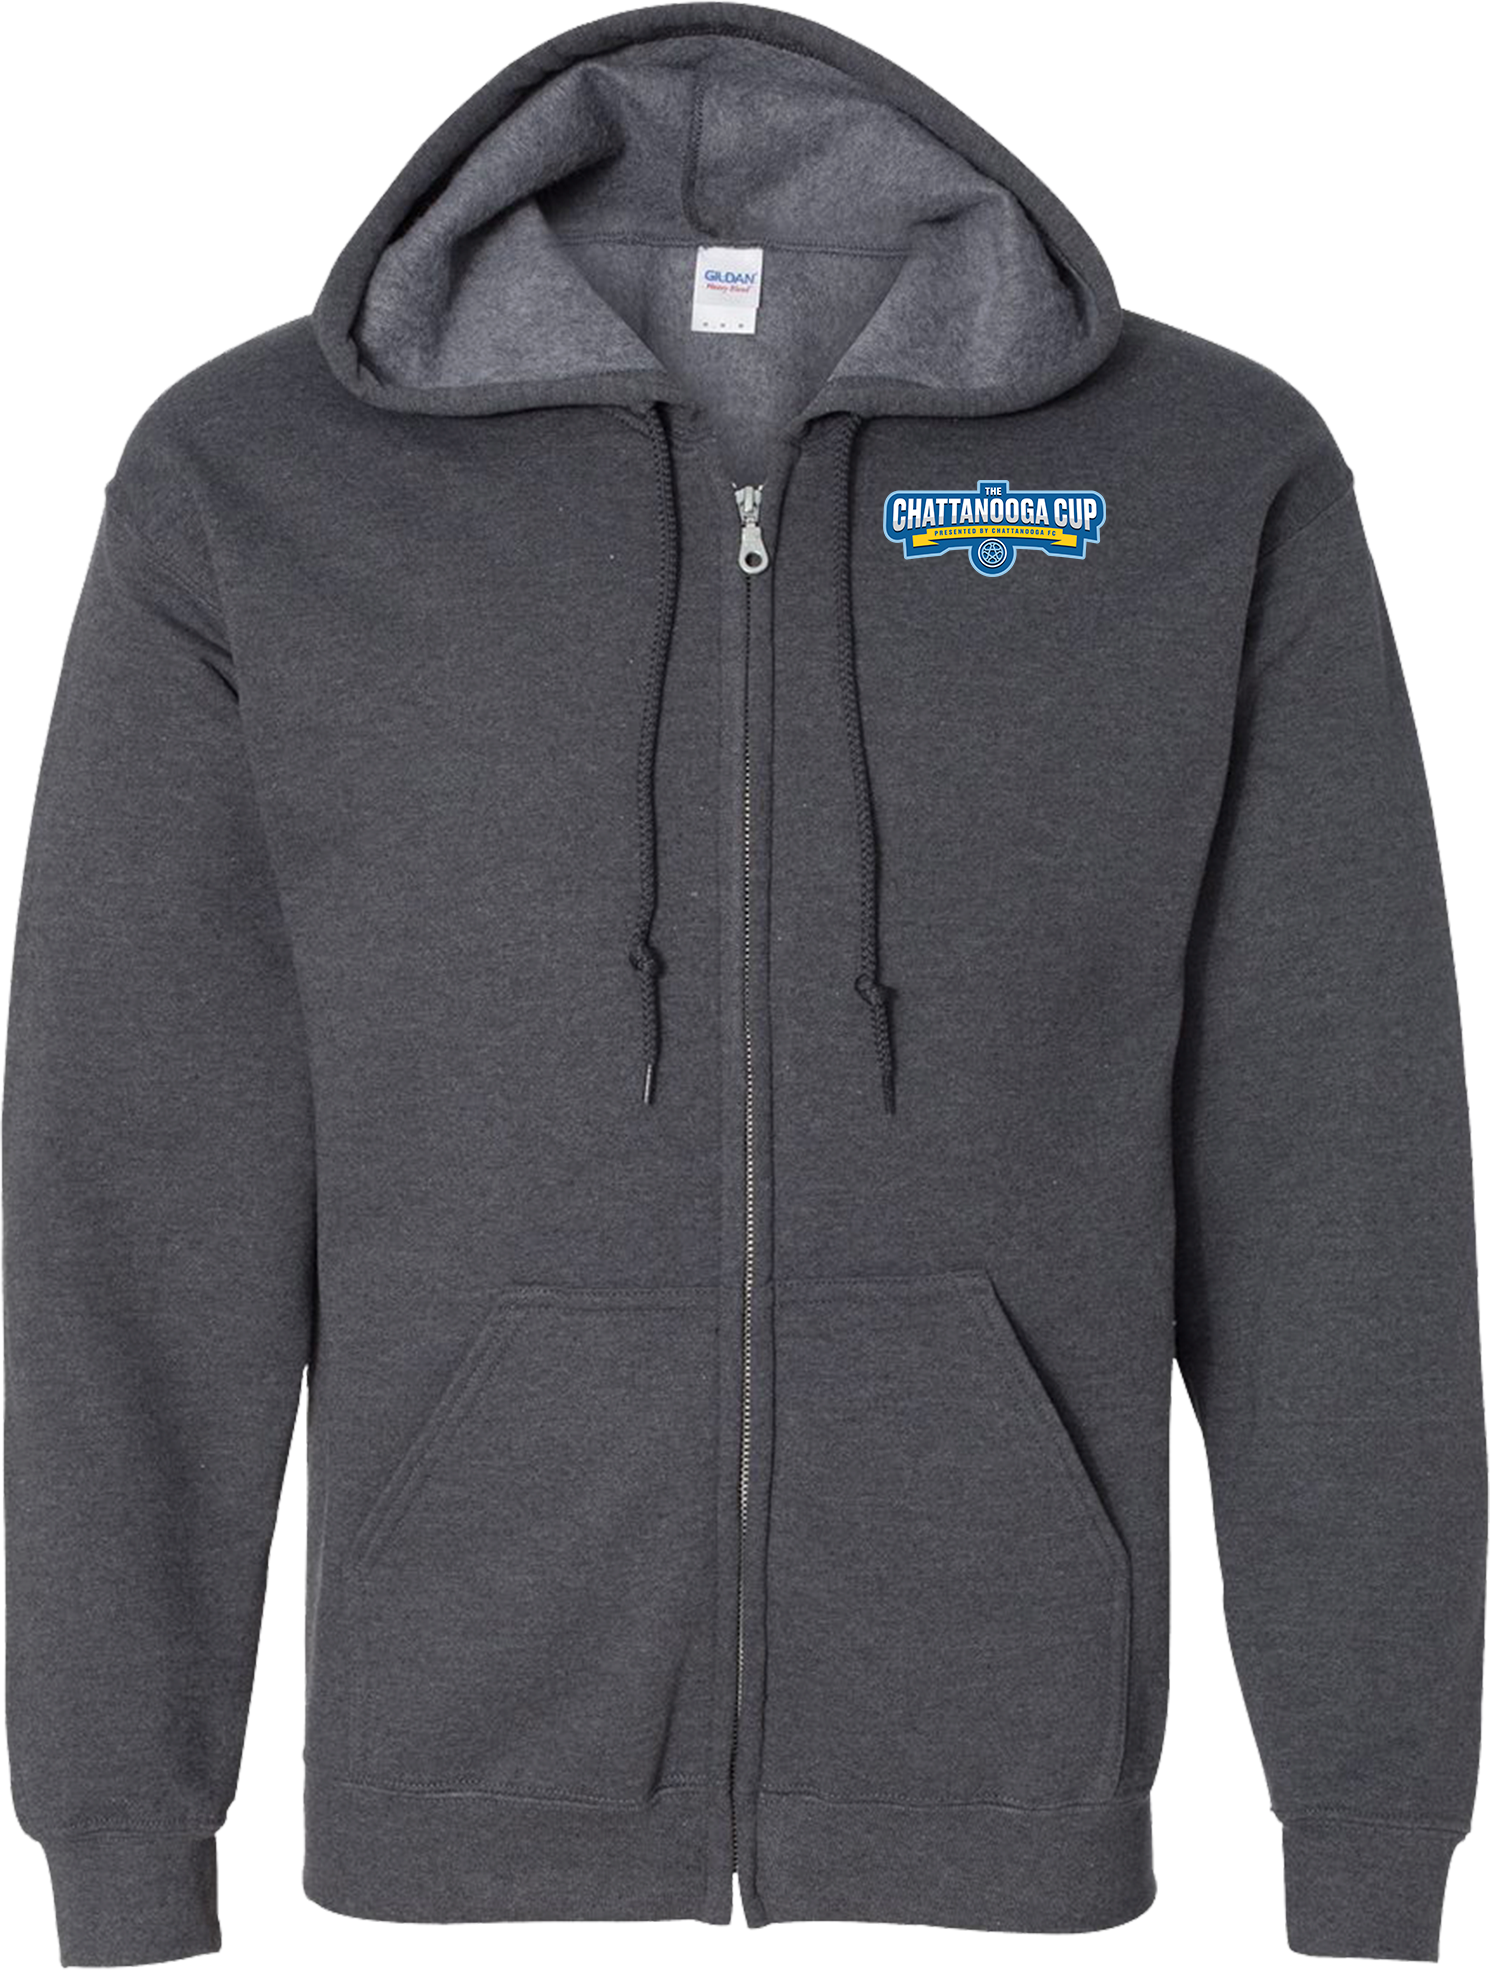 FULL ZIP HOODIES - 2023 The Chattanooga Cup